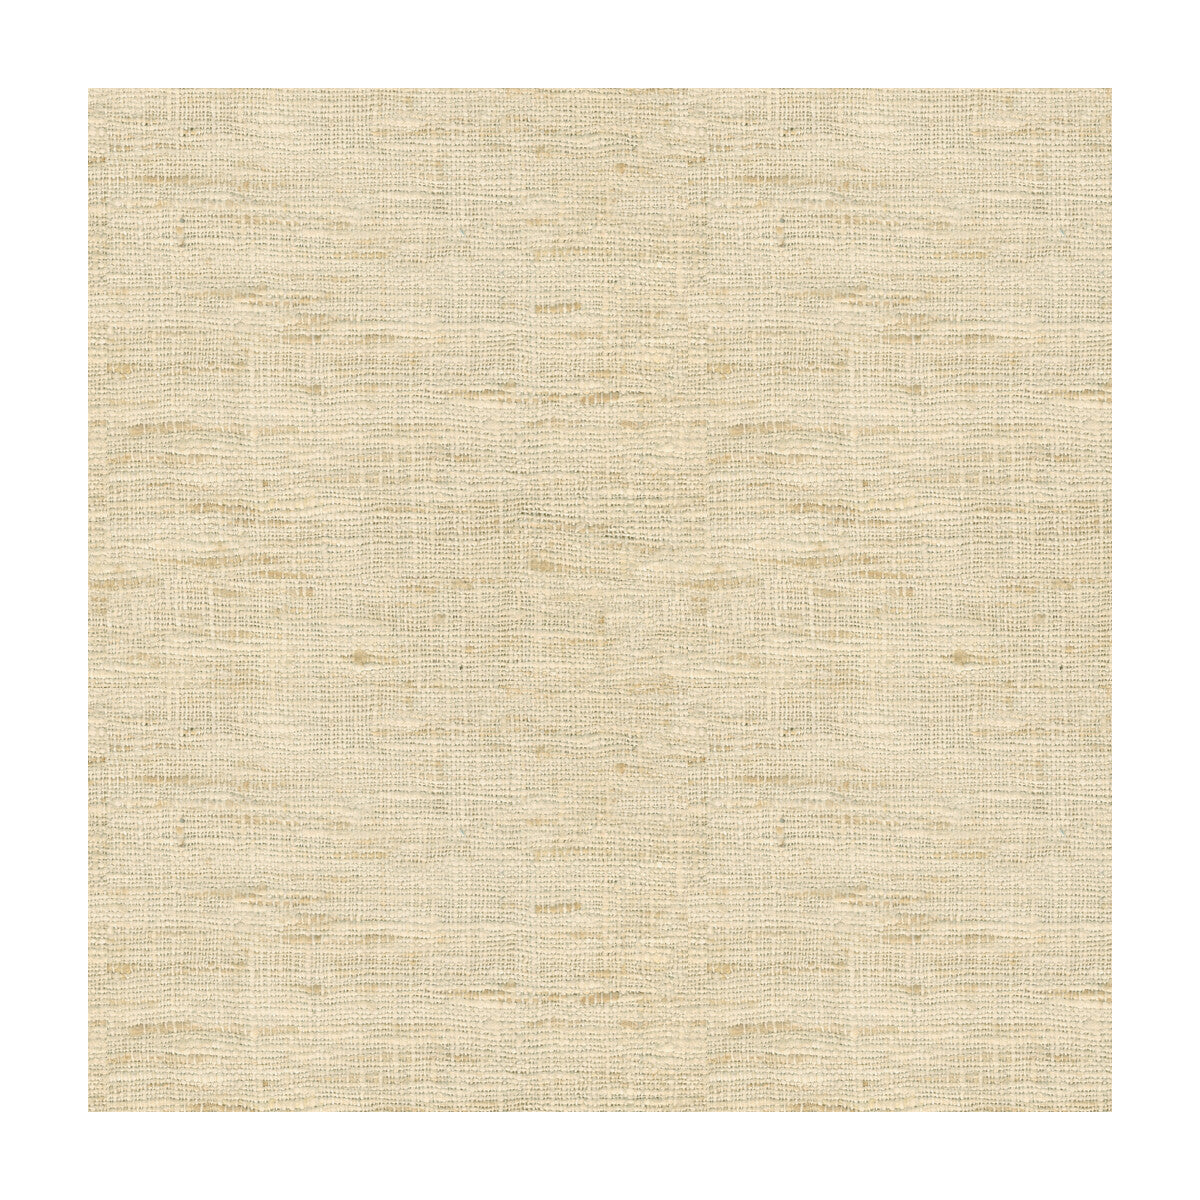 Sonoma fabric in oatmeal color - pattern GWF-3109.116.0 - by Lee Jofa Modern in the Kelly Wearstler II collection